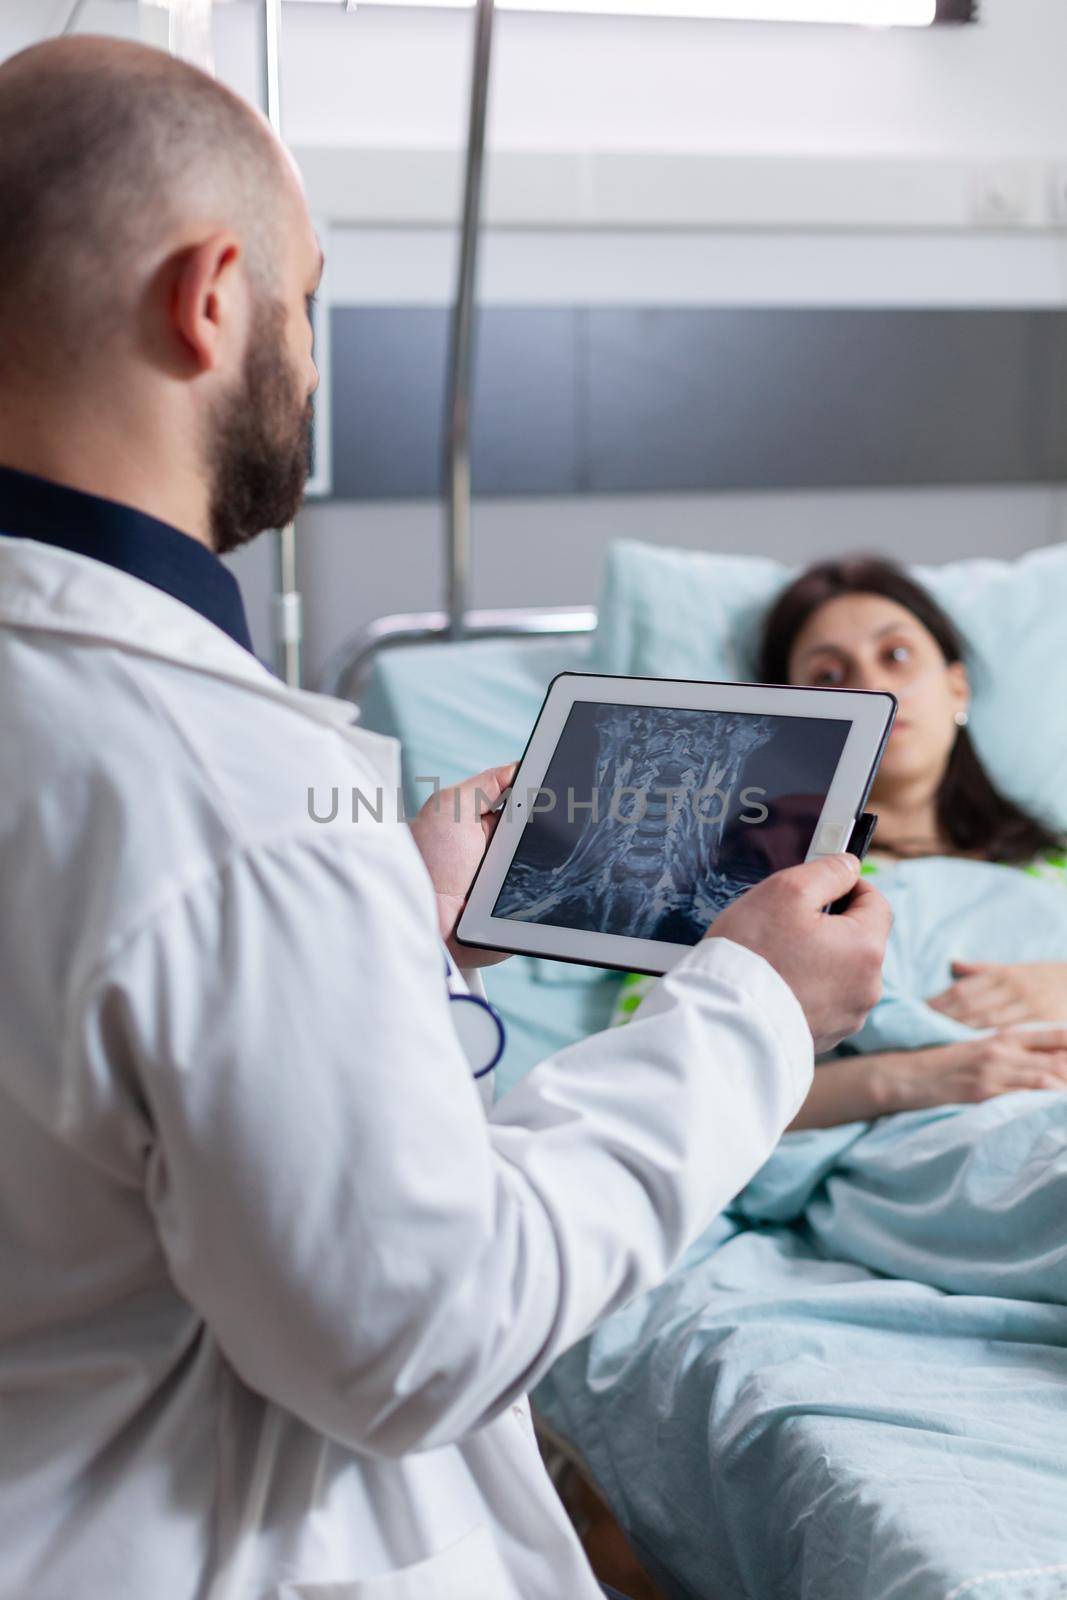 Specialist doctor monitoring sick woman explaining bones radiography using tablet computer working in hospital ward. Patient resting in bed recovering after sickness surgery